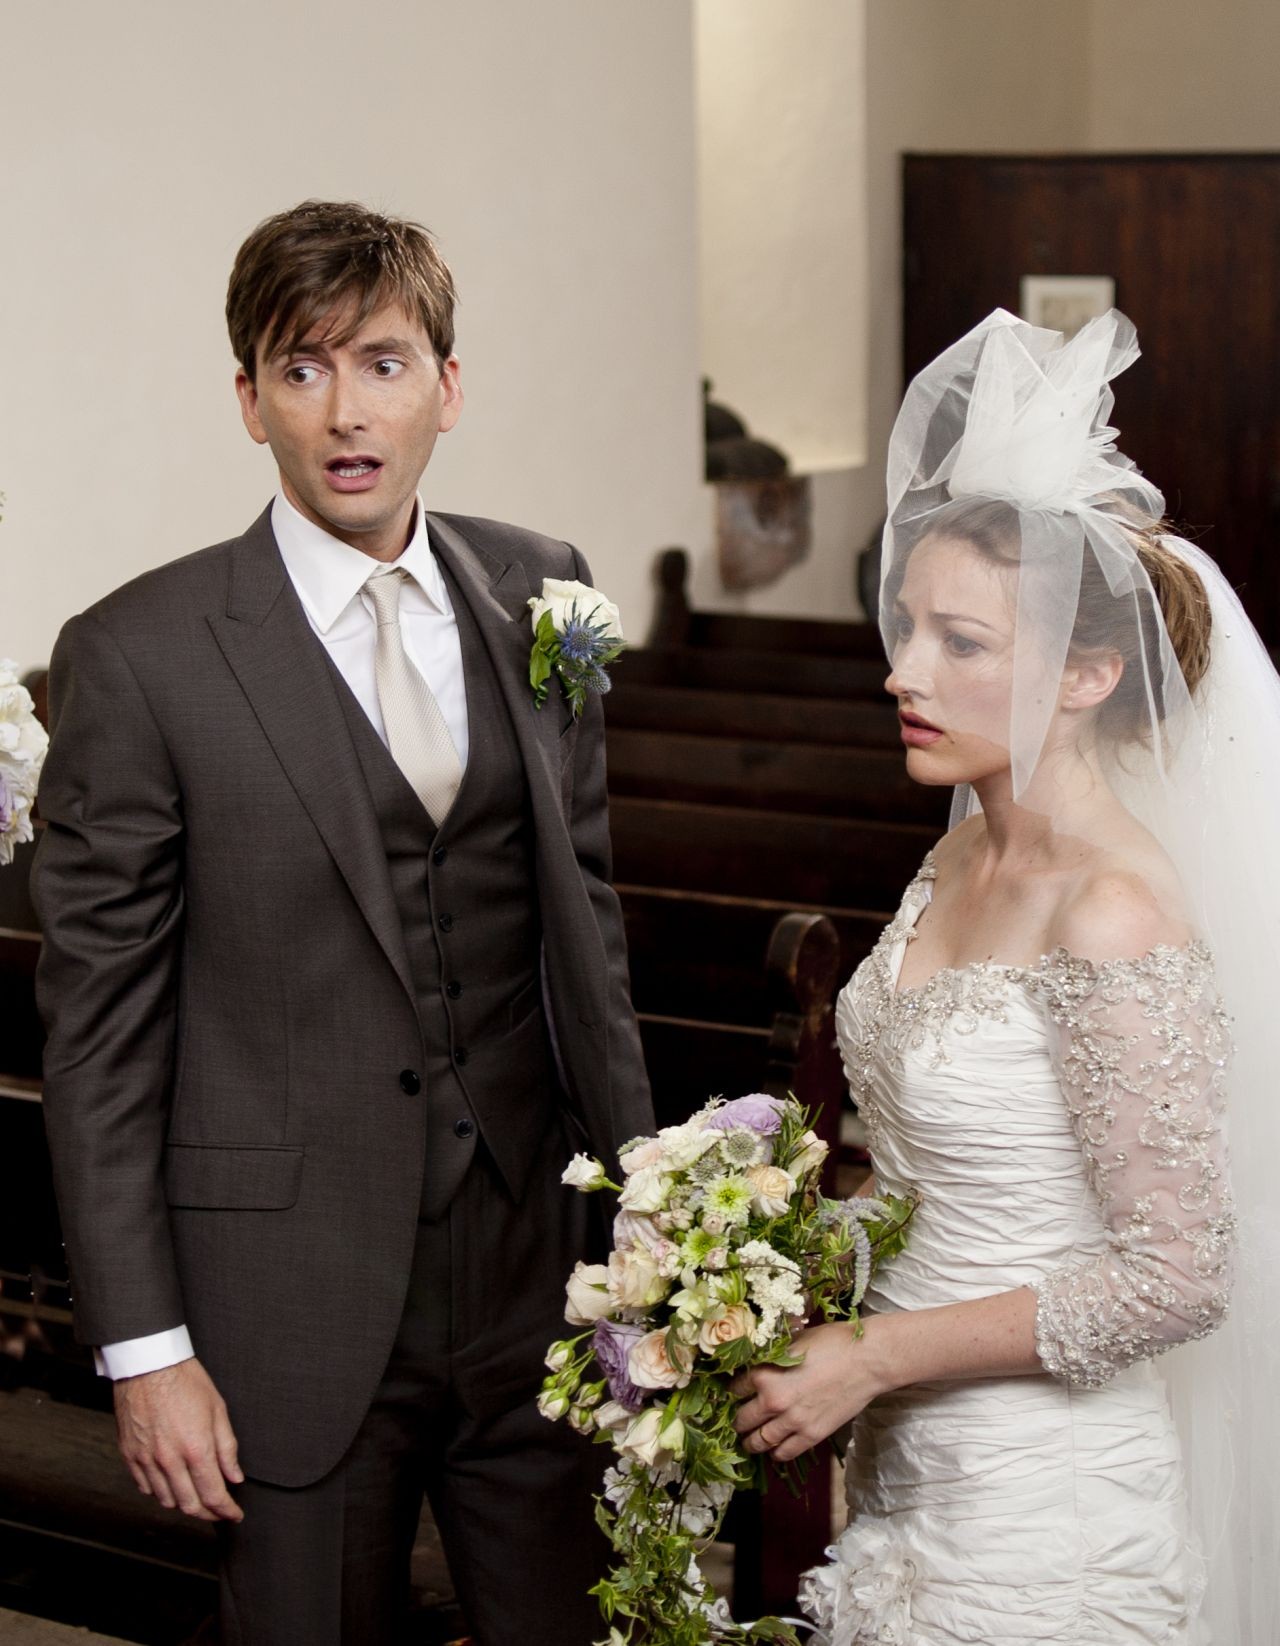 David Tennant stars as James Arber and Kelly Macdonald stars as Katie NicAoidh in IFC Films' The Decoy Bride (2012)